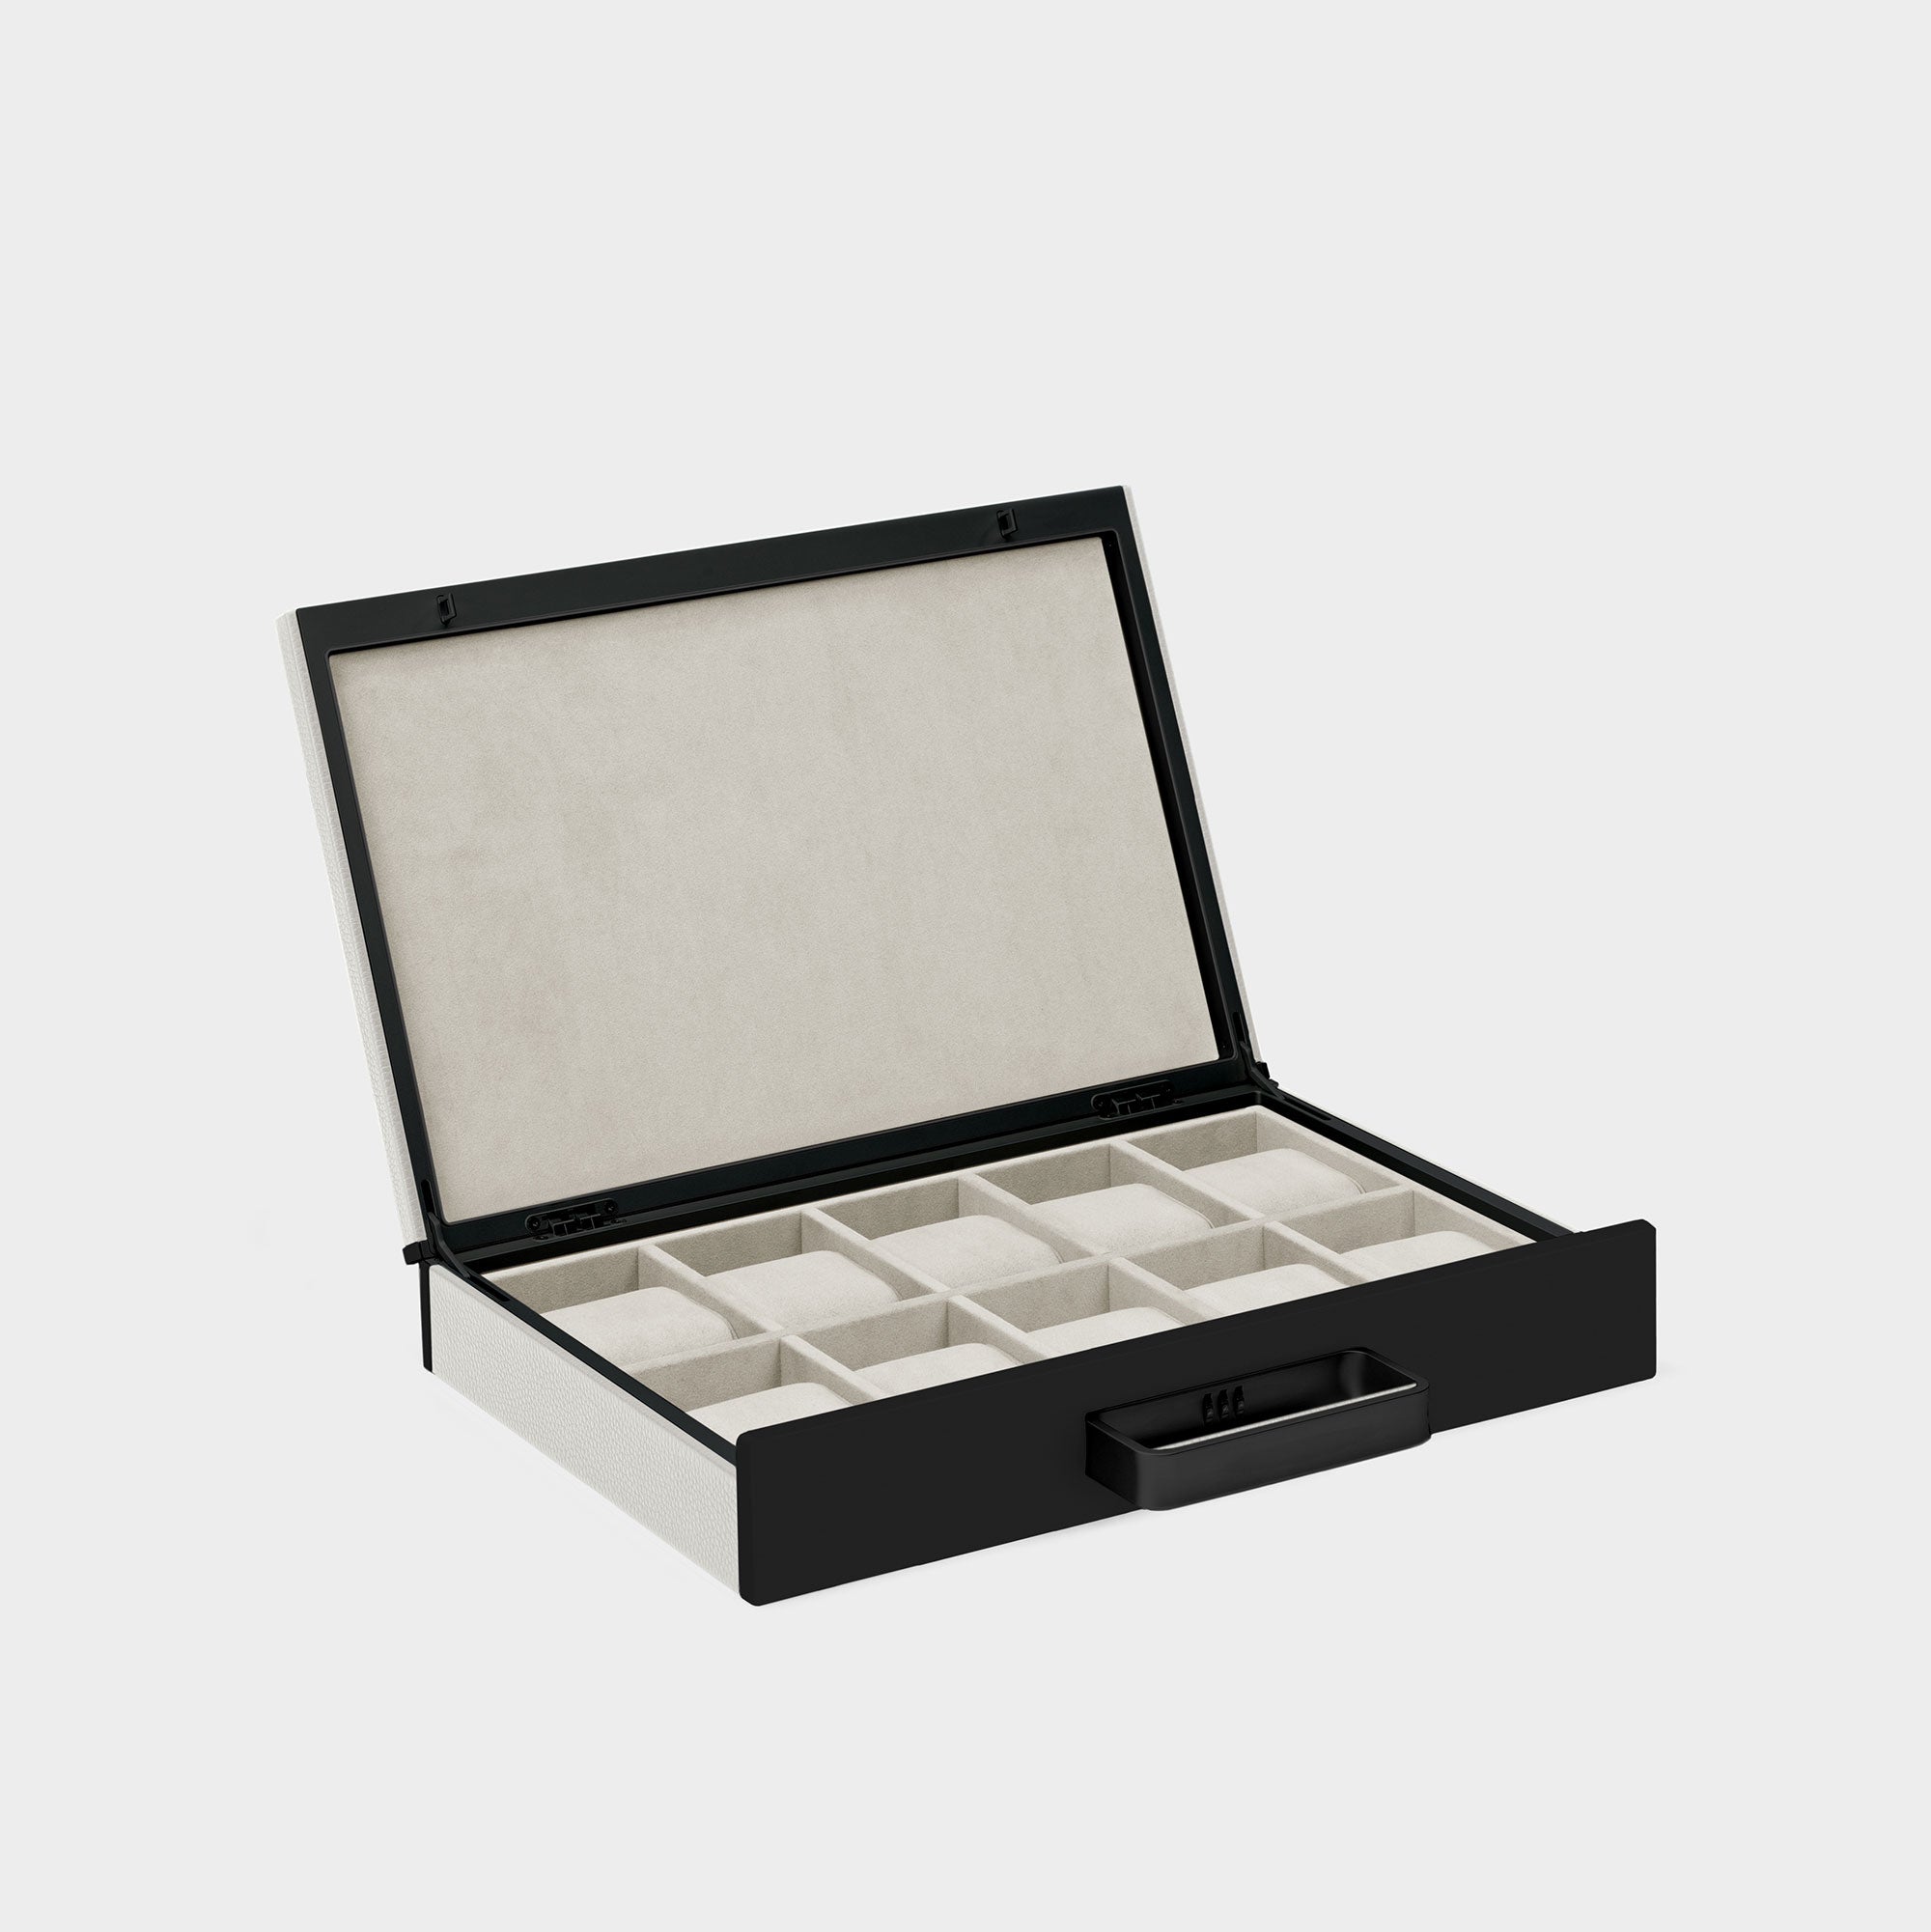 Charles Simon Mackenzie 10 watch briefcase made from fine white leather, black anodized aluminum and carbon fiber casing and soft white Alcantara interior lining